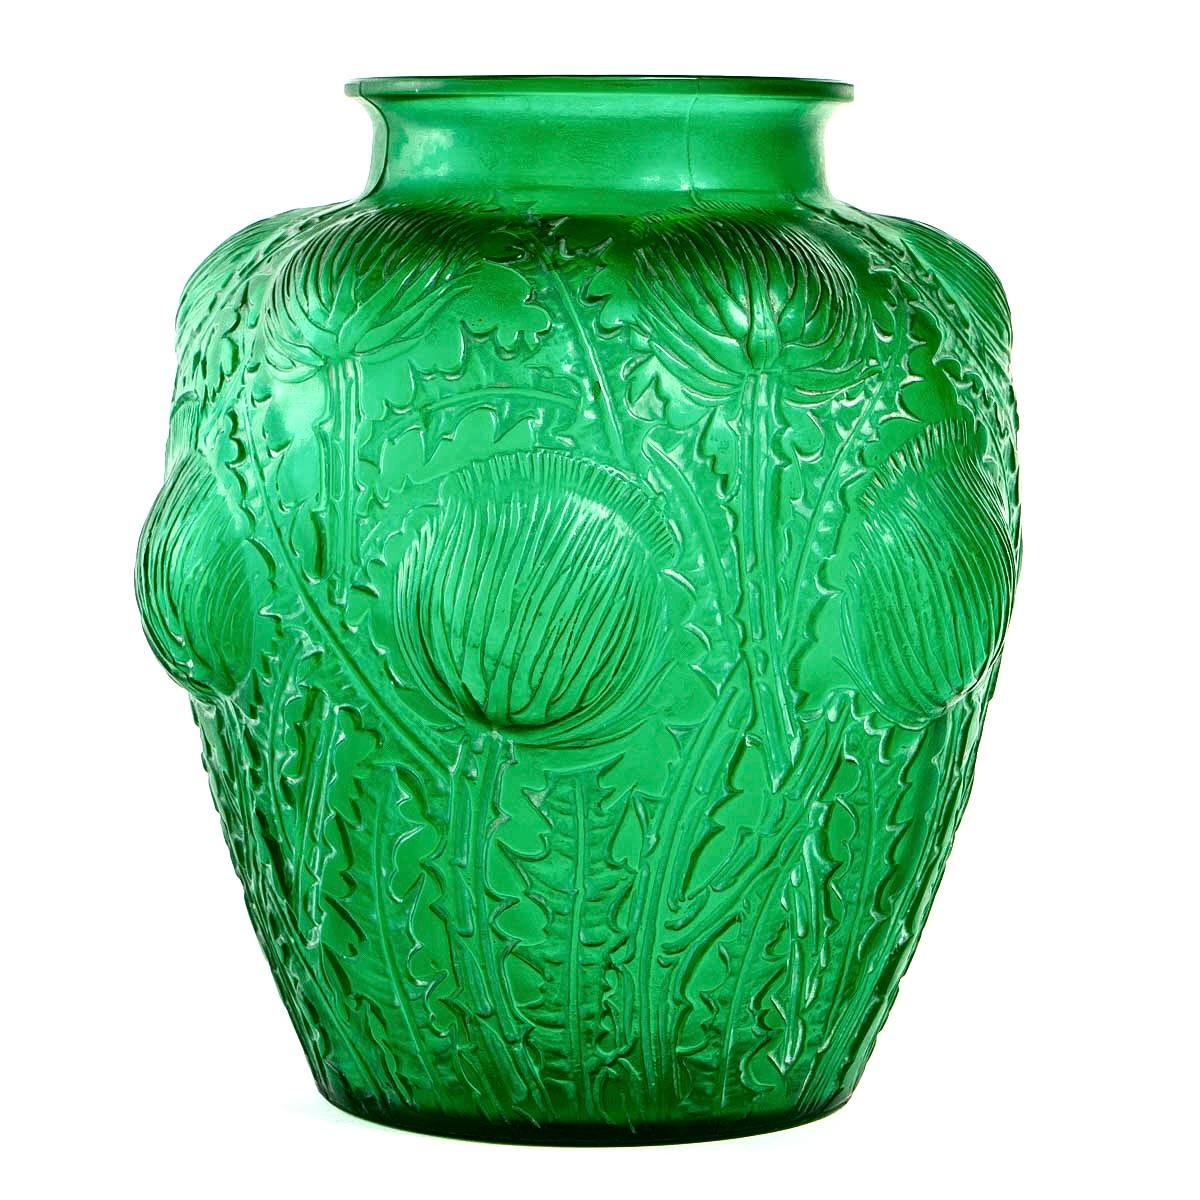 Art Deco 1926 René Lalique Domremy Vase in Emerald Green Glass with White Patina